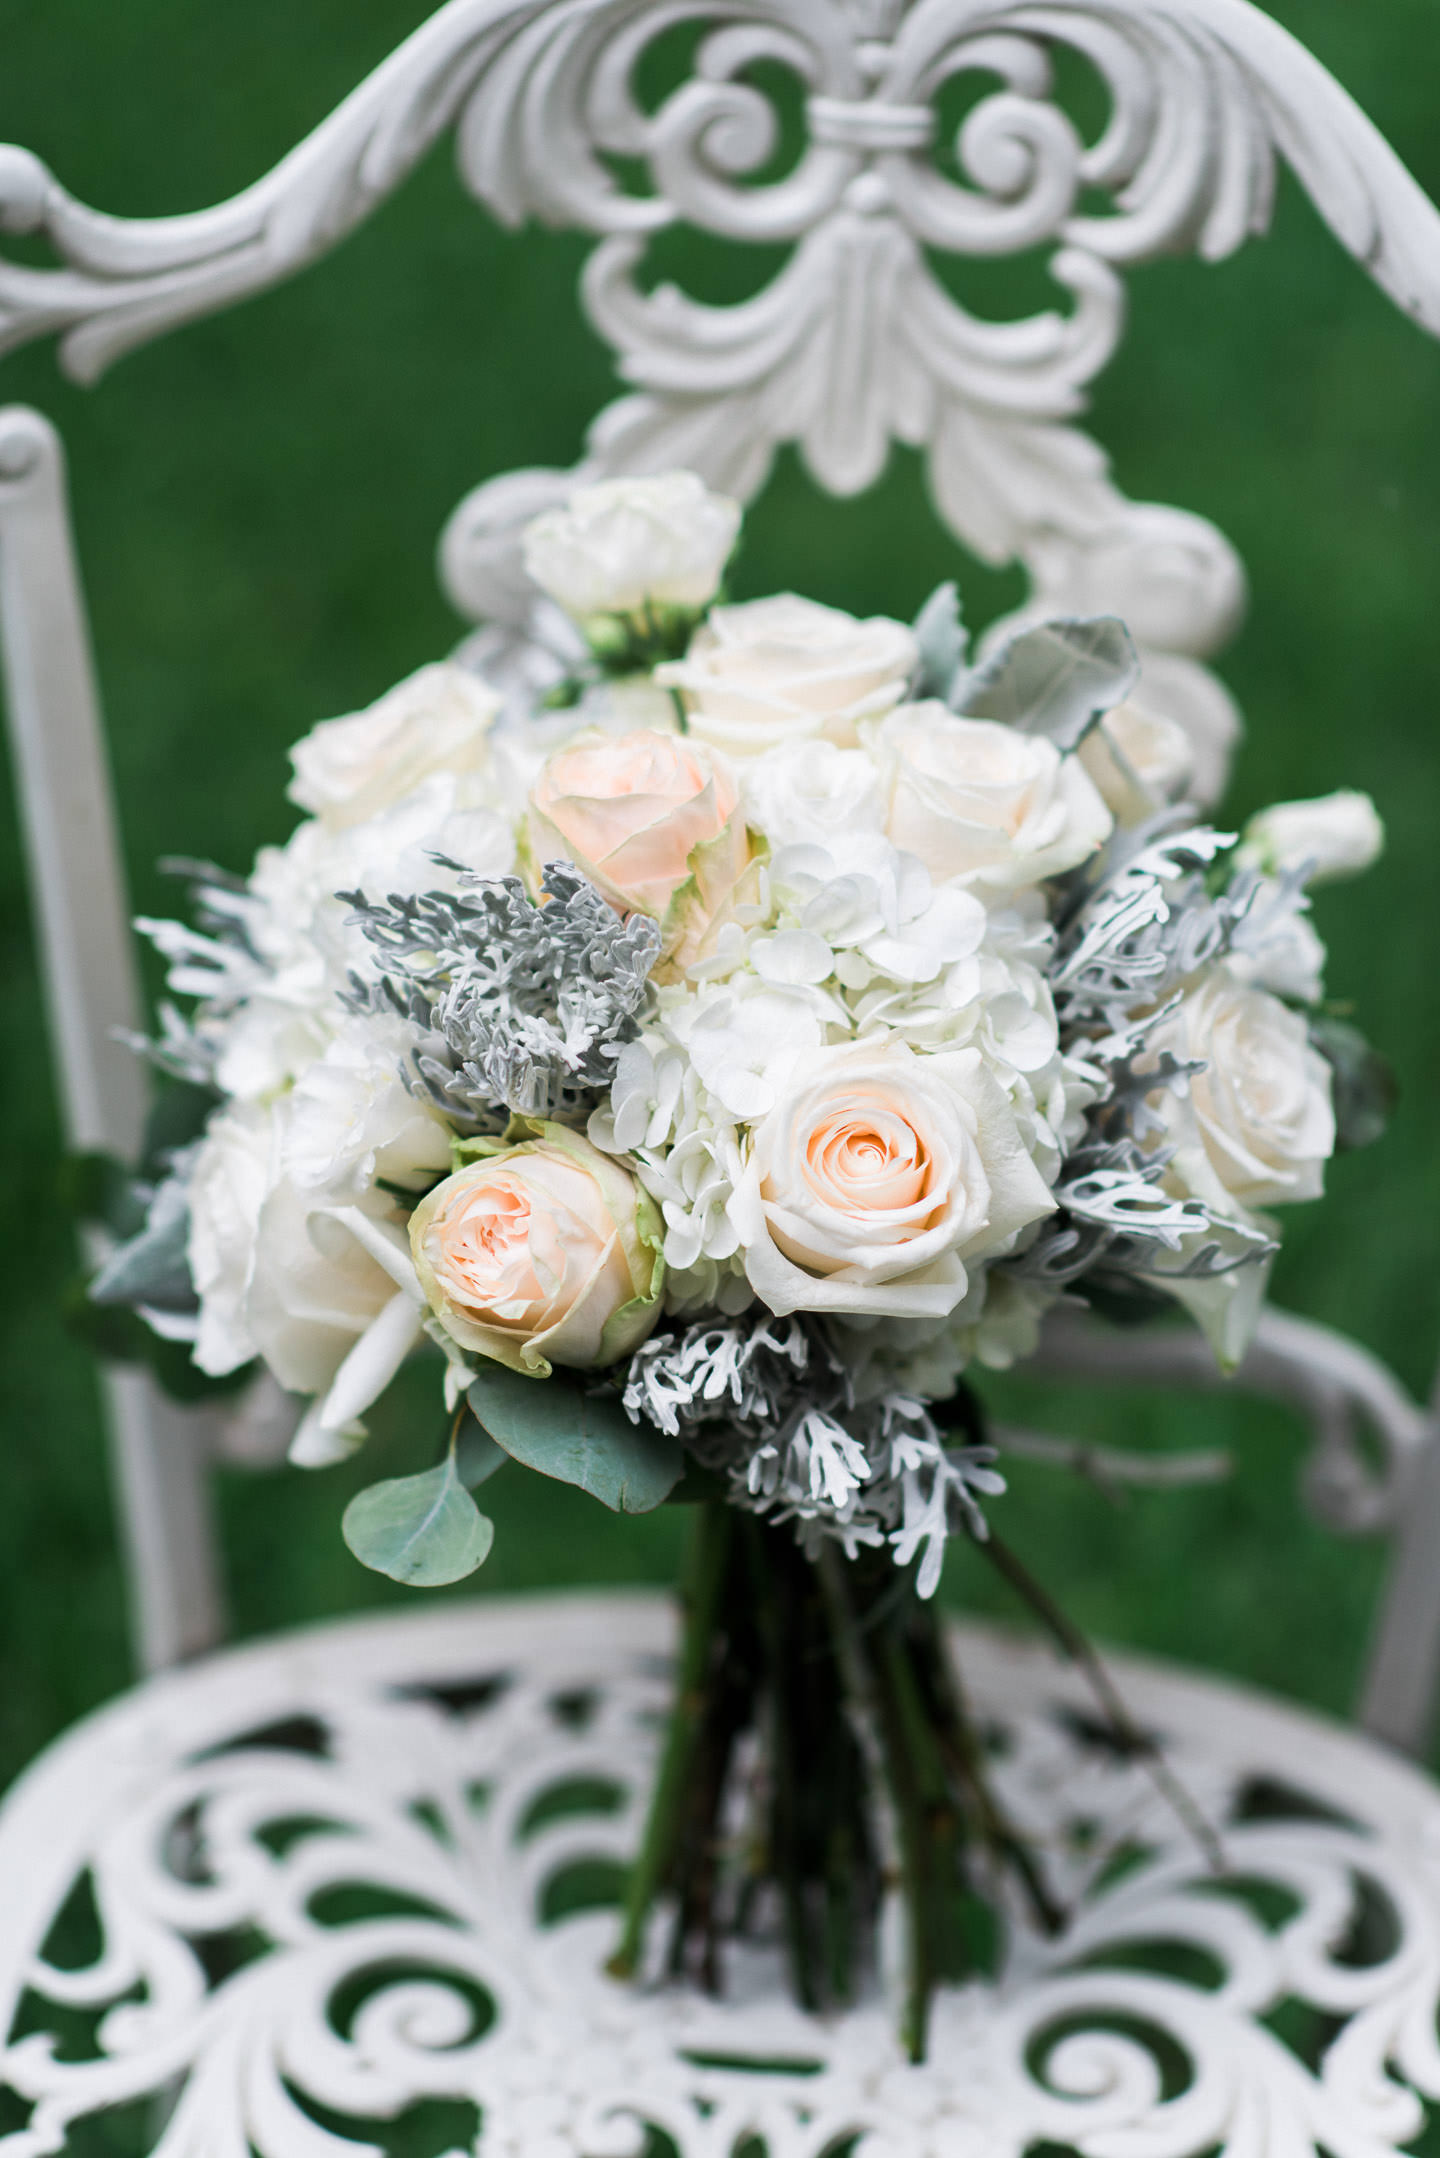 Dusty Miller, peach rose, hydrangea, and eucalyptus bouquet on white iron chair for Mississippi wedding